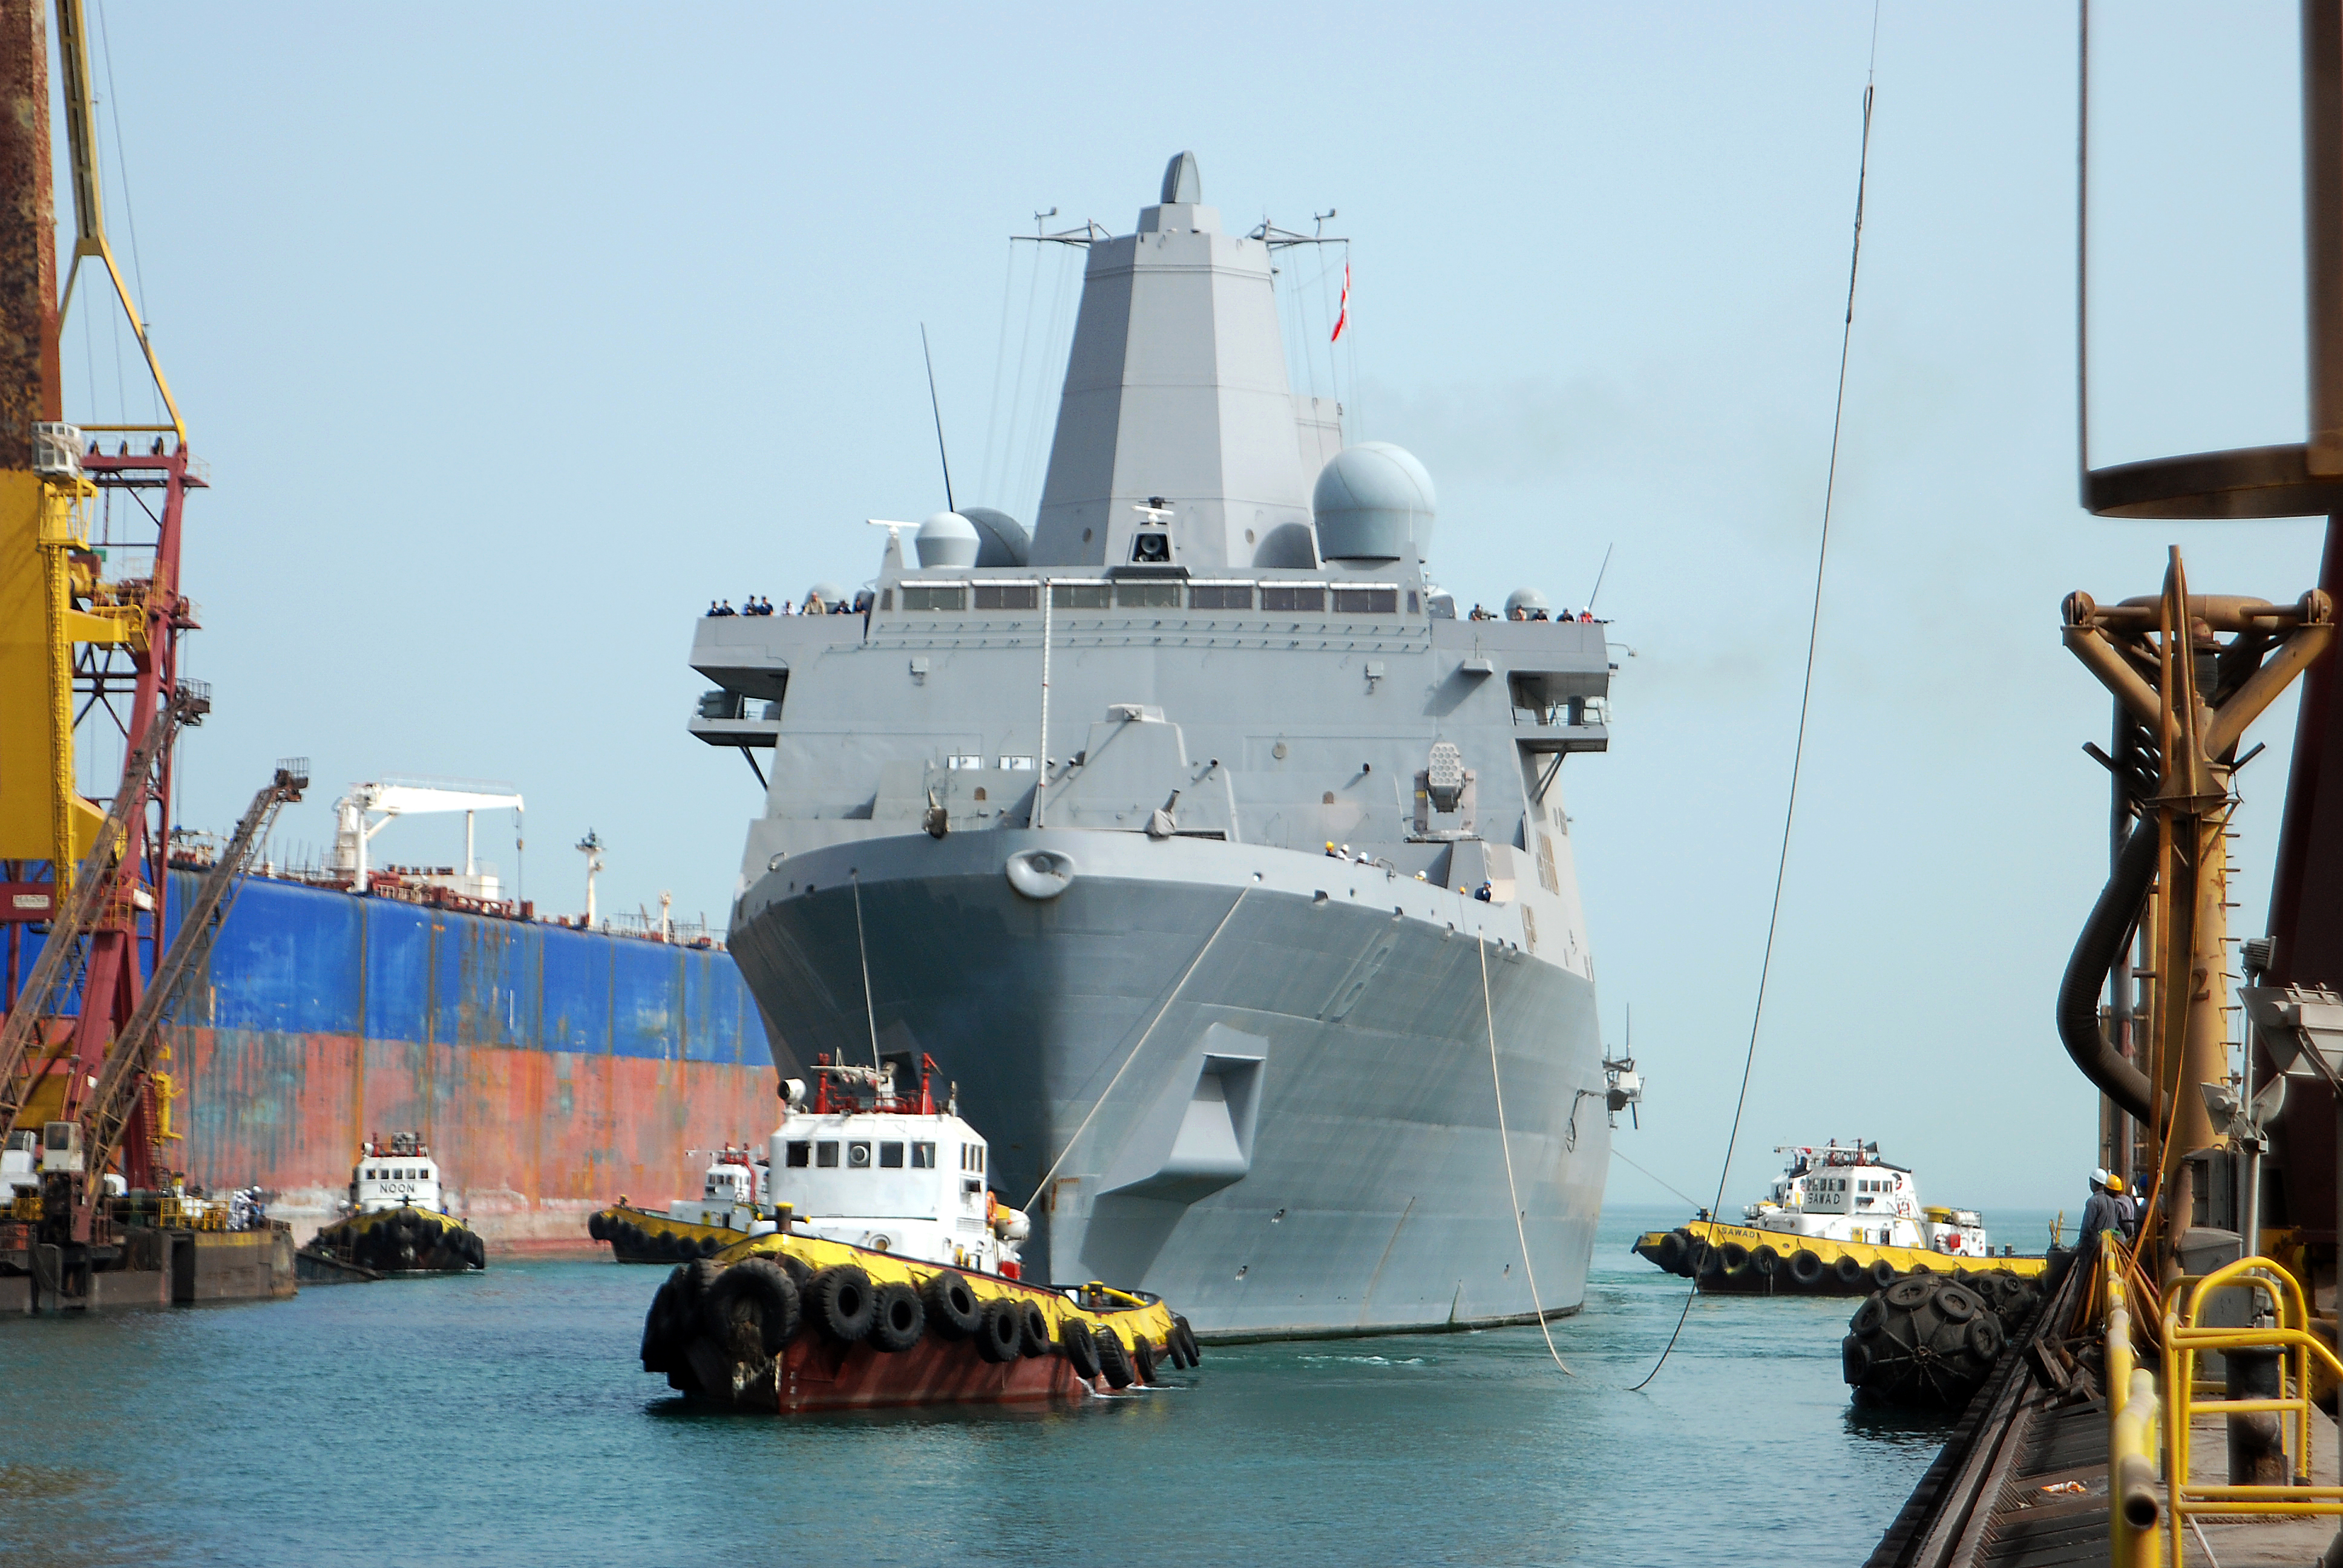 US Navy 090425-N-8053S-046 The amphibious transport dock ship USS New Orleans (LPD 18) is guided Saturday, April 25, 2009 into the Arab Shipbuilding ^ Repair Yard Company dry-dock facility